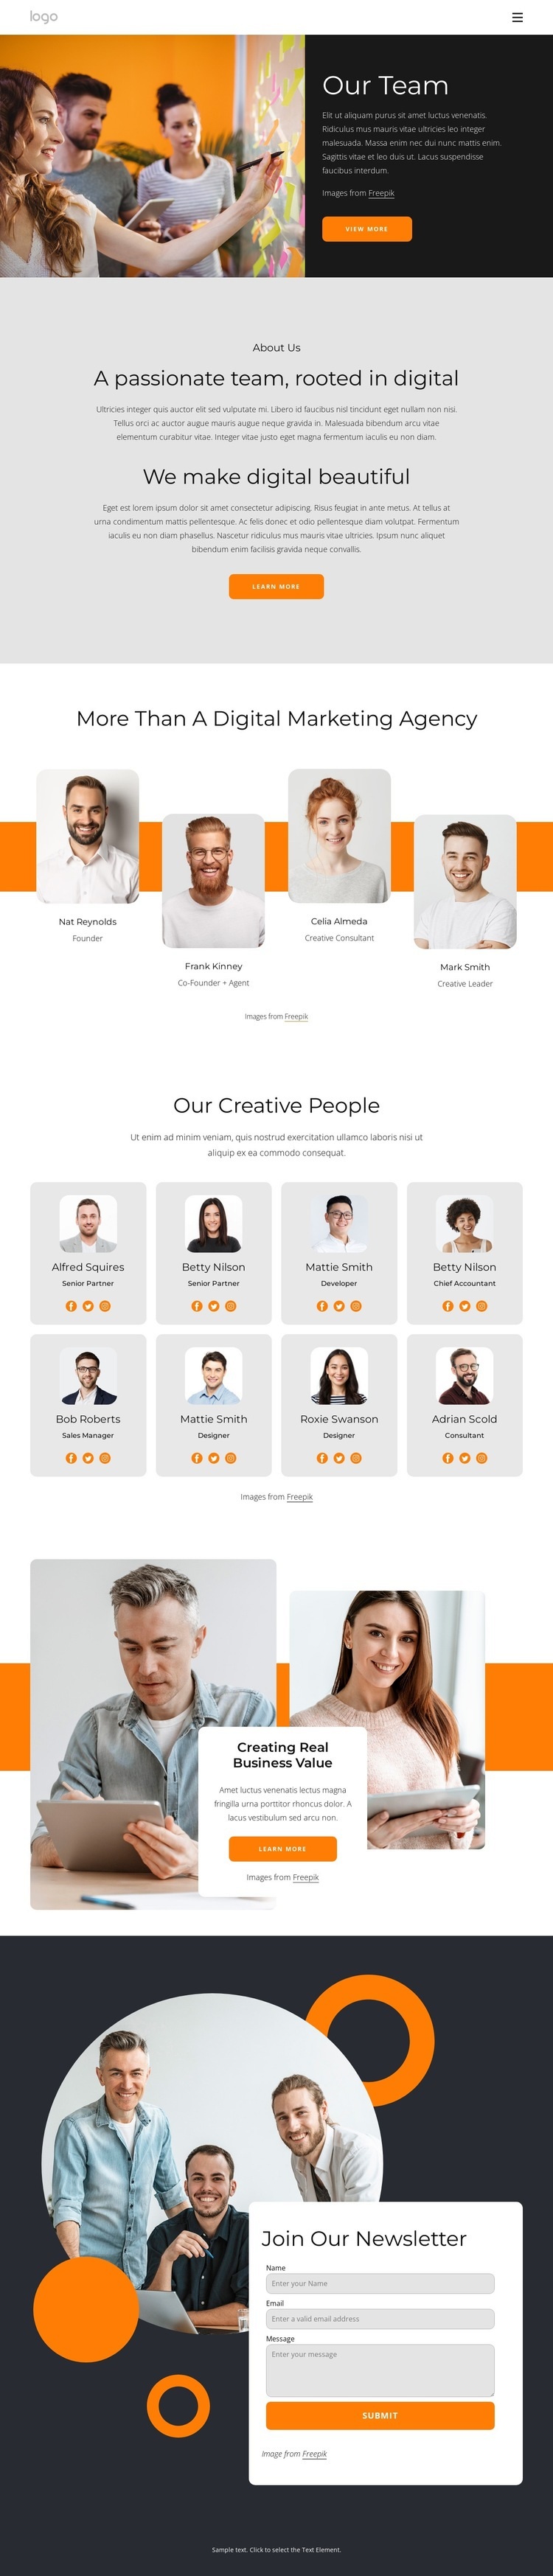 We are creative people with big dreams Homepage Design